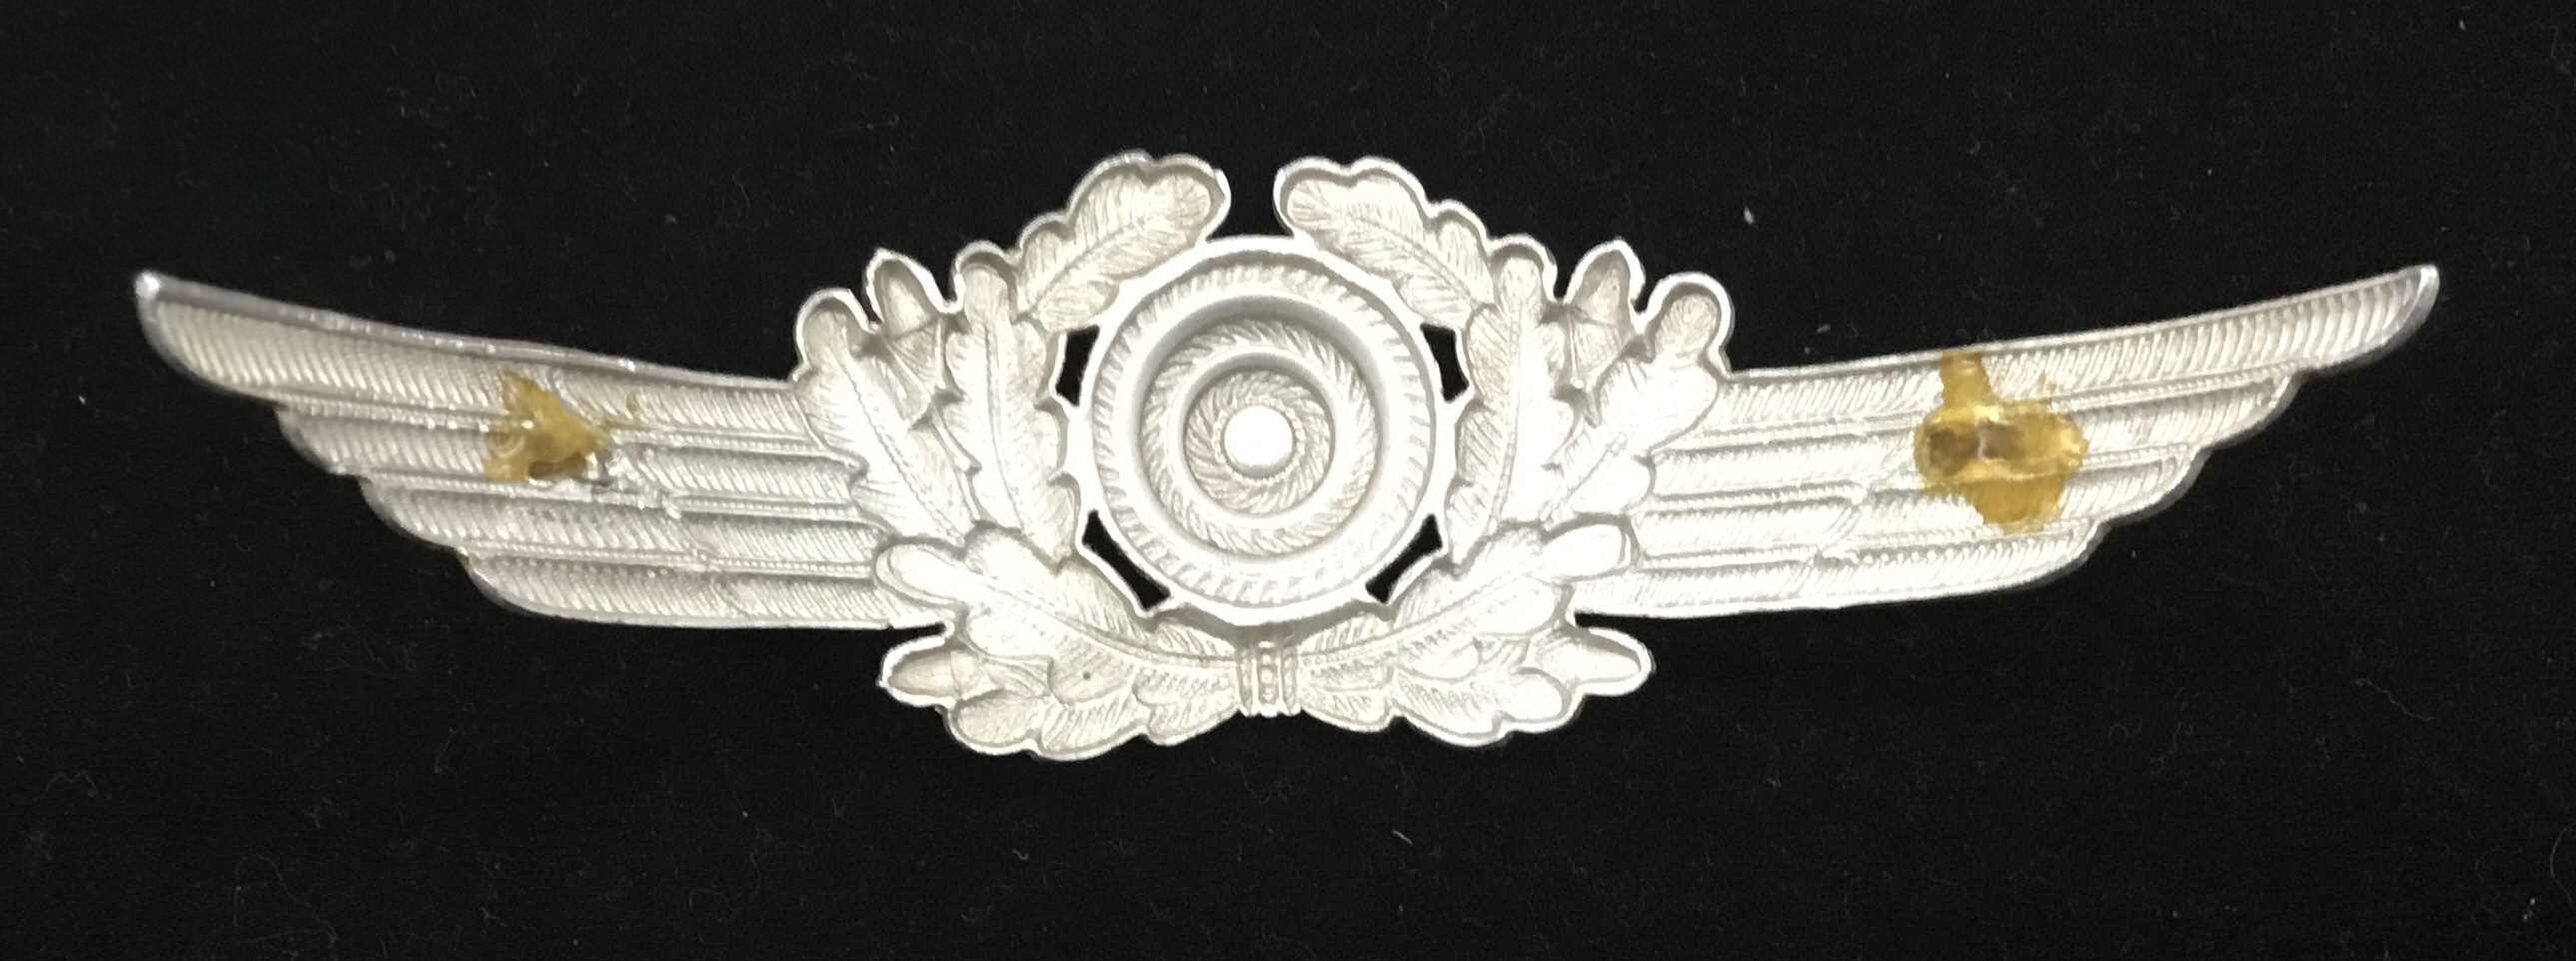 2 Ww2 Luftwaffe officers metal visor badges. Both with painted cockade area, flanked by die - Image 9 of 9